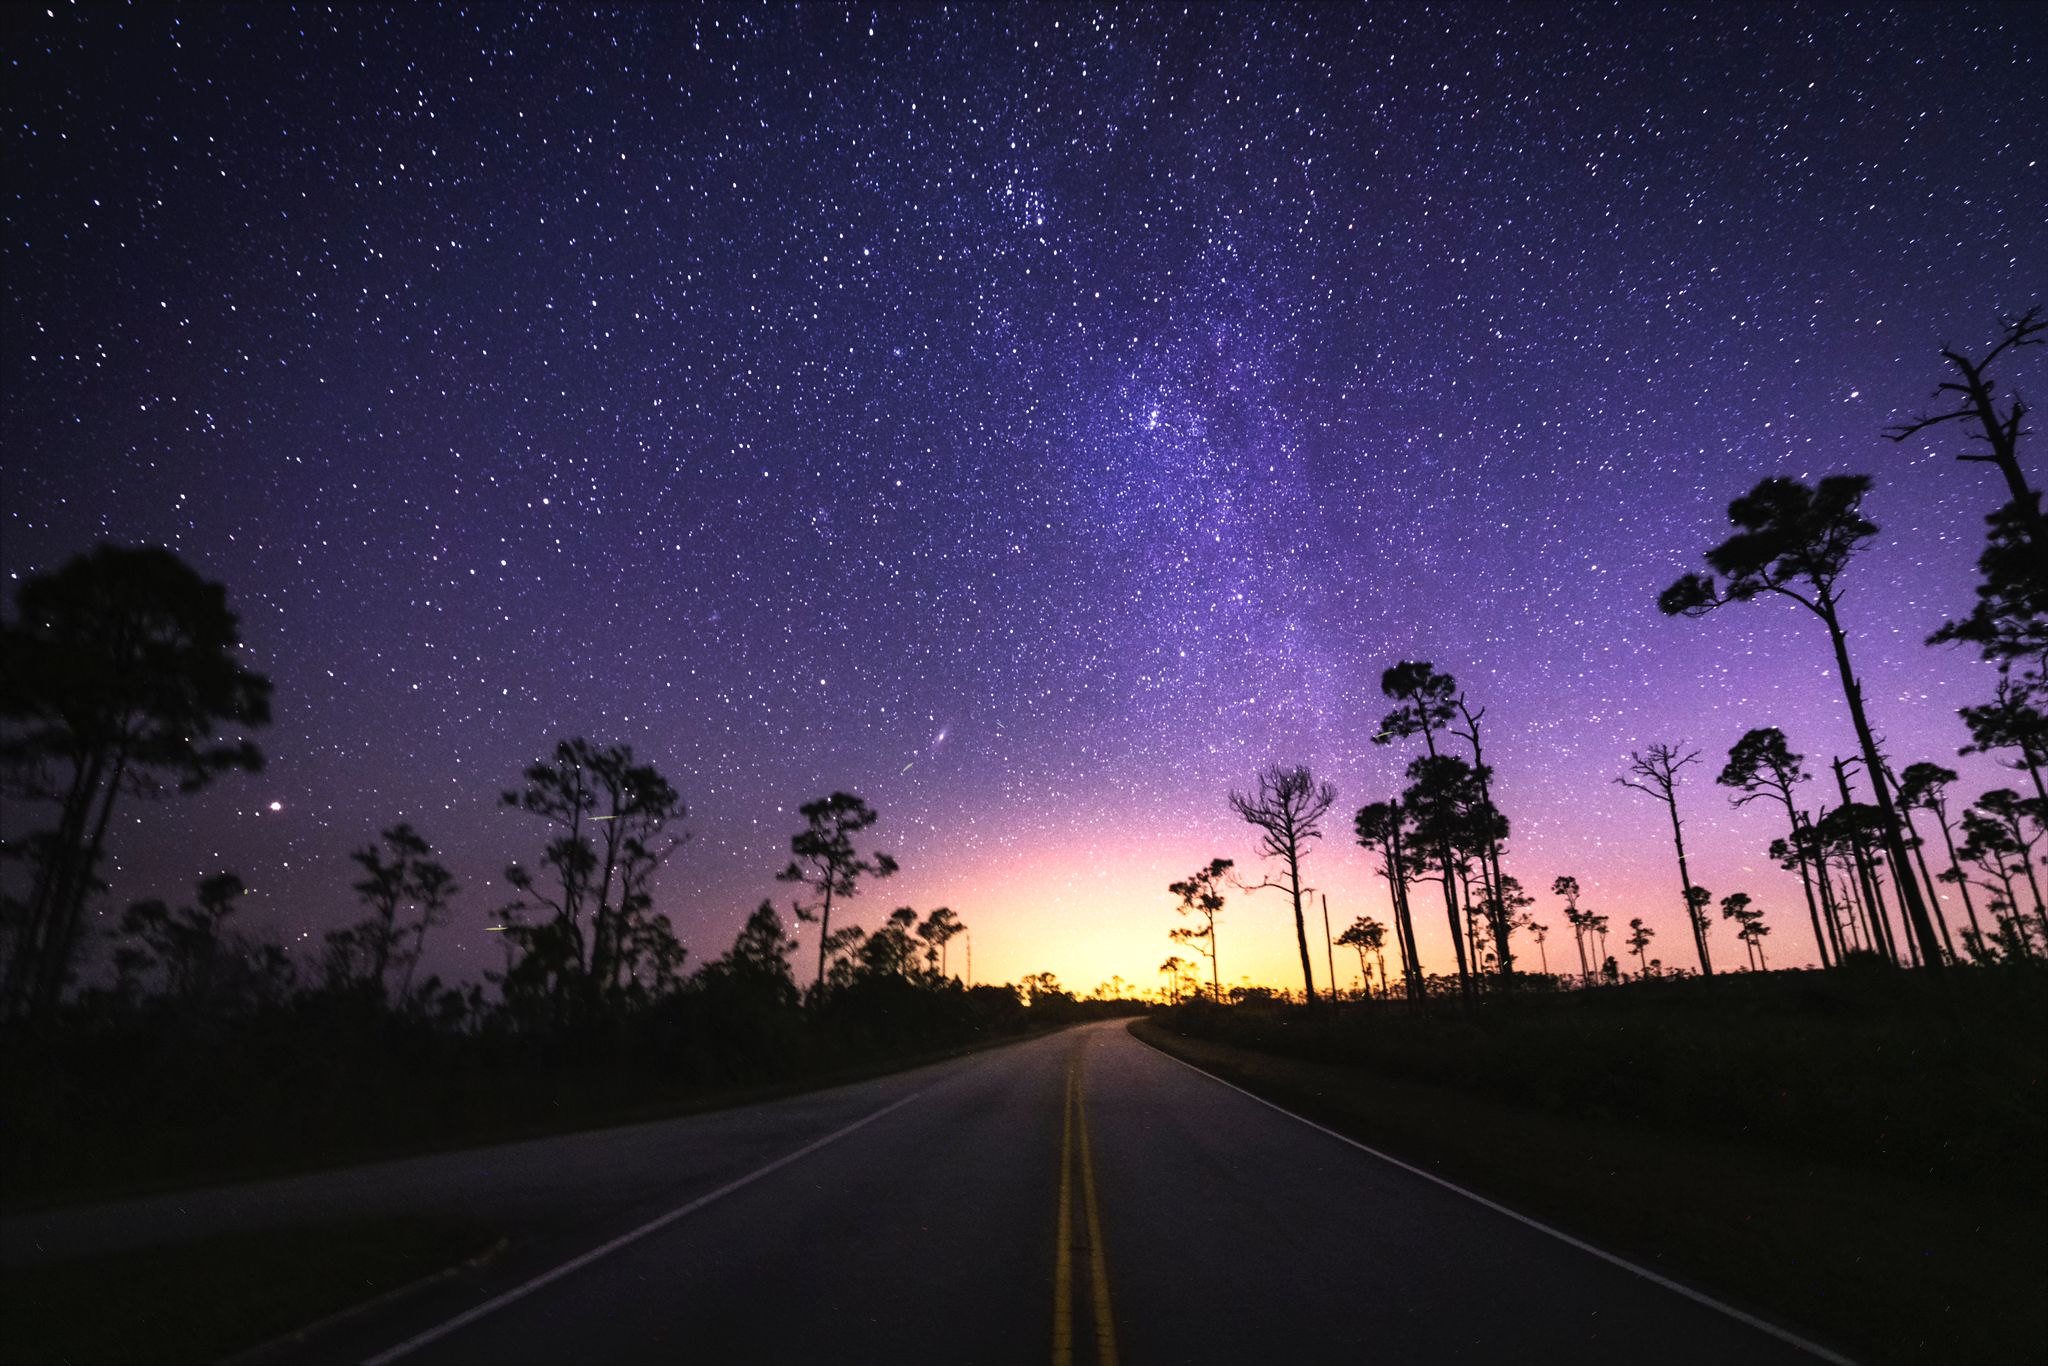 A road surrounded by trees on either sides under a clear and starry night.